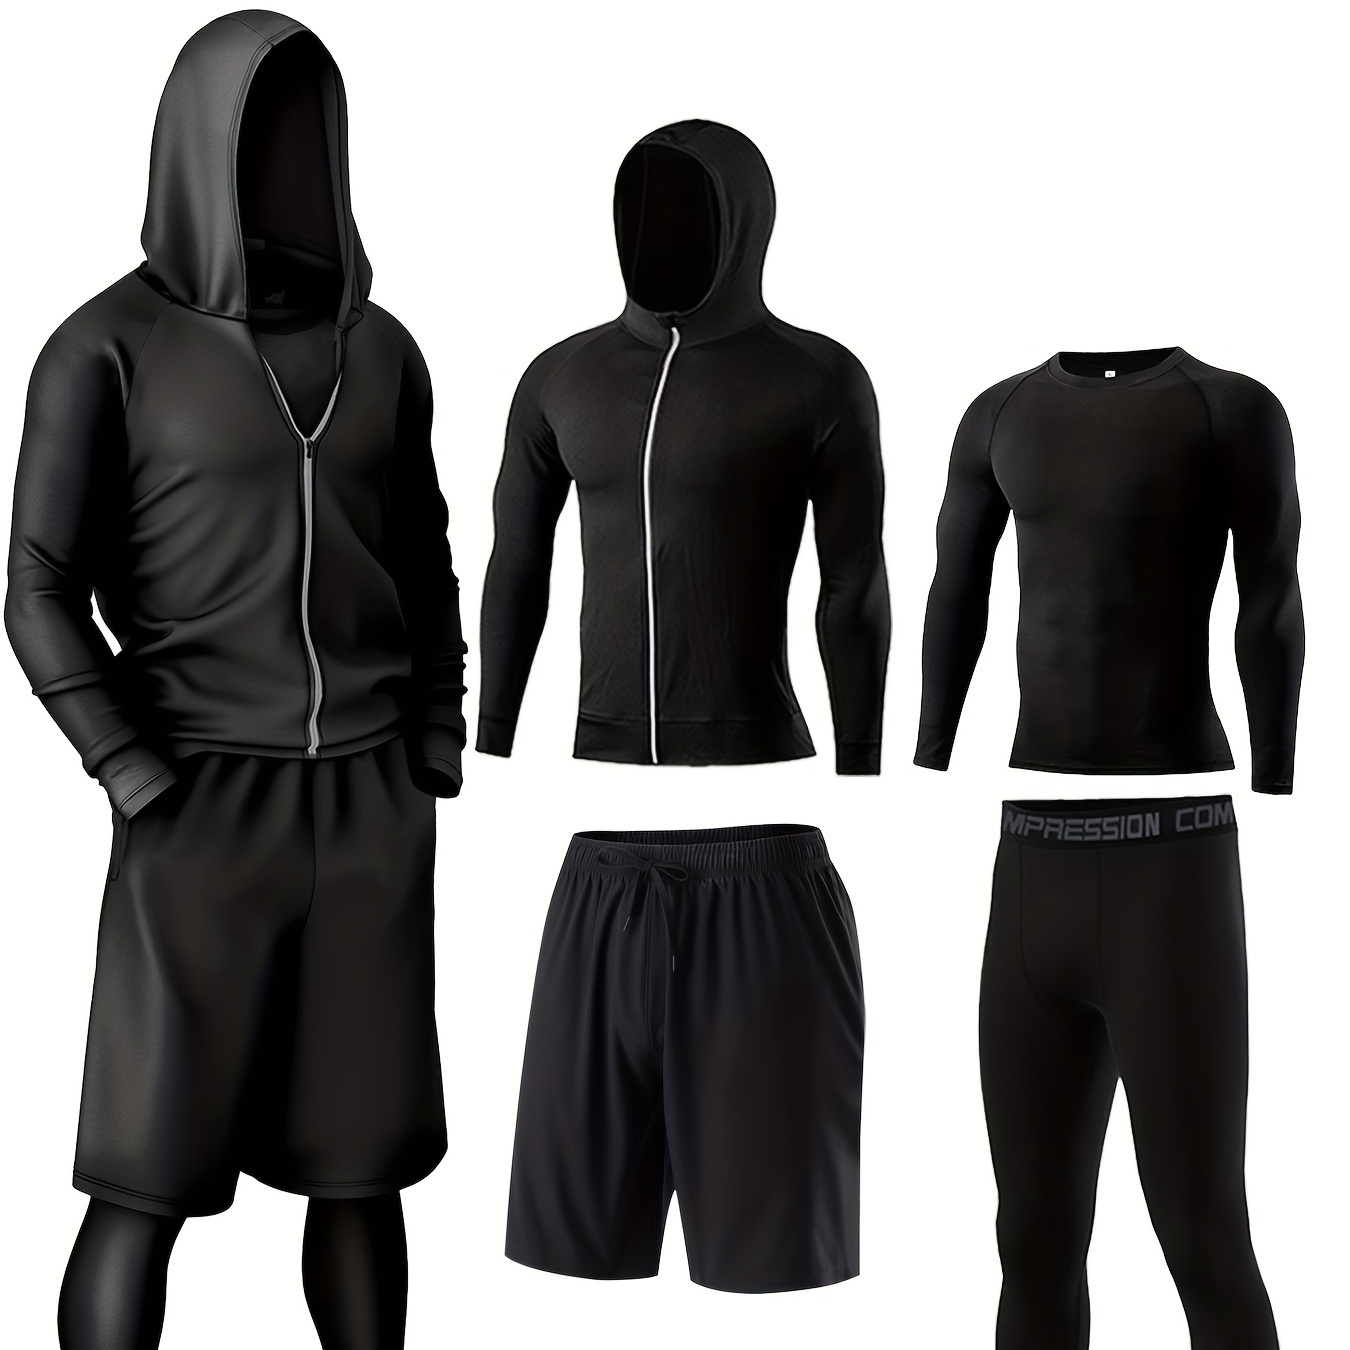 

4-piece Men's Activewear Set, Breathable & Quick-drying, Athletic Sports Tracksuit - Hoodie, Jacket, Shorts & Pants For Running, Fitness, Outdoor Activities